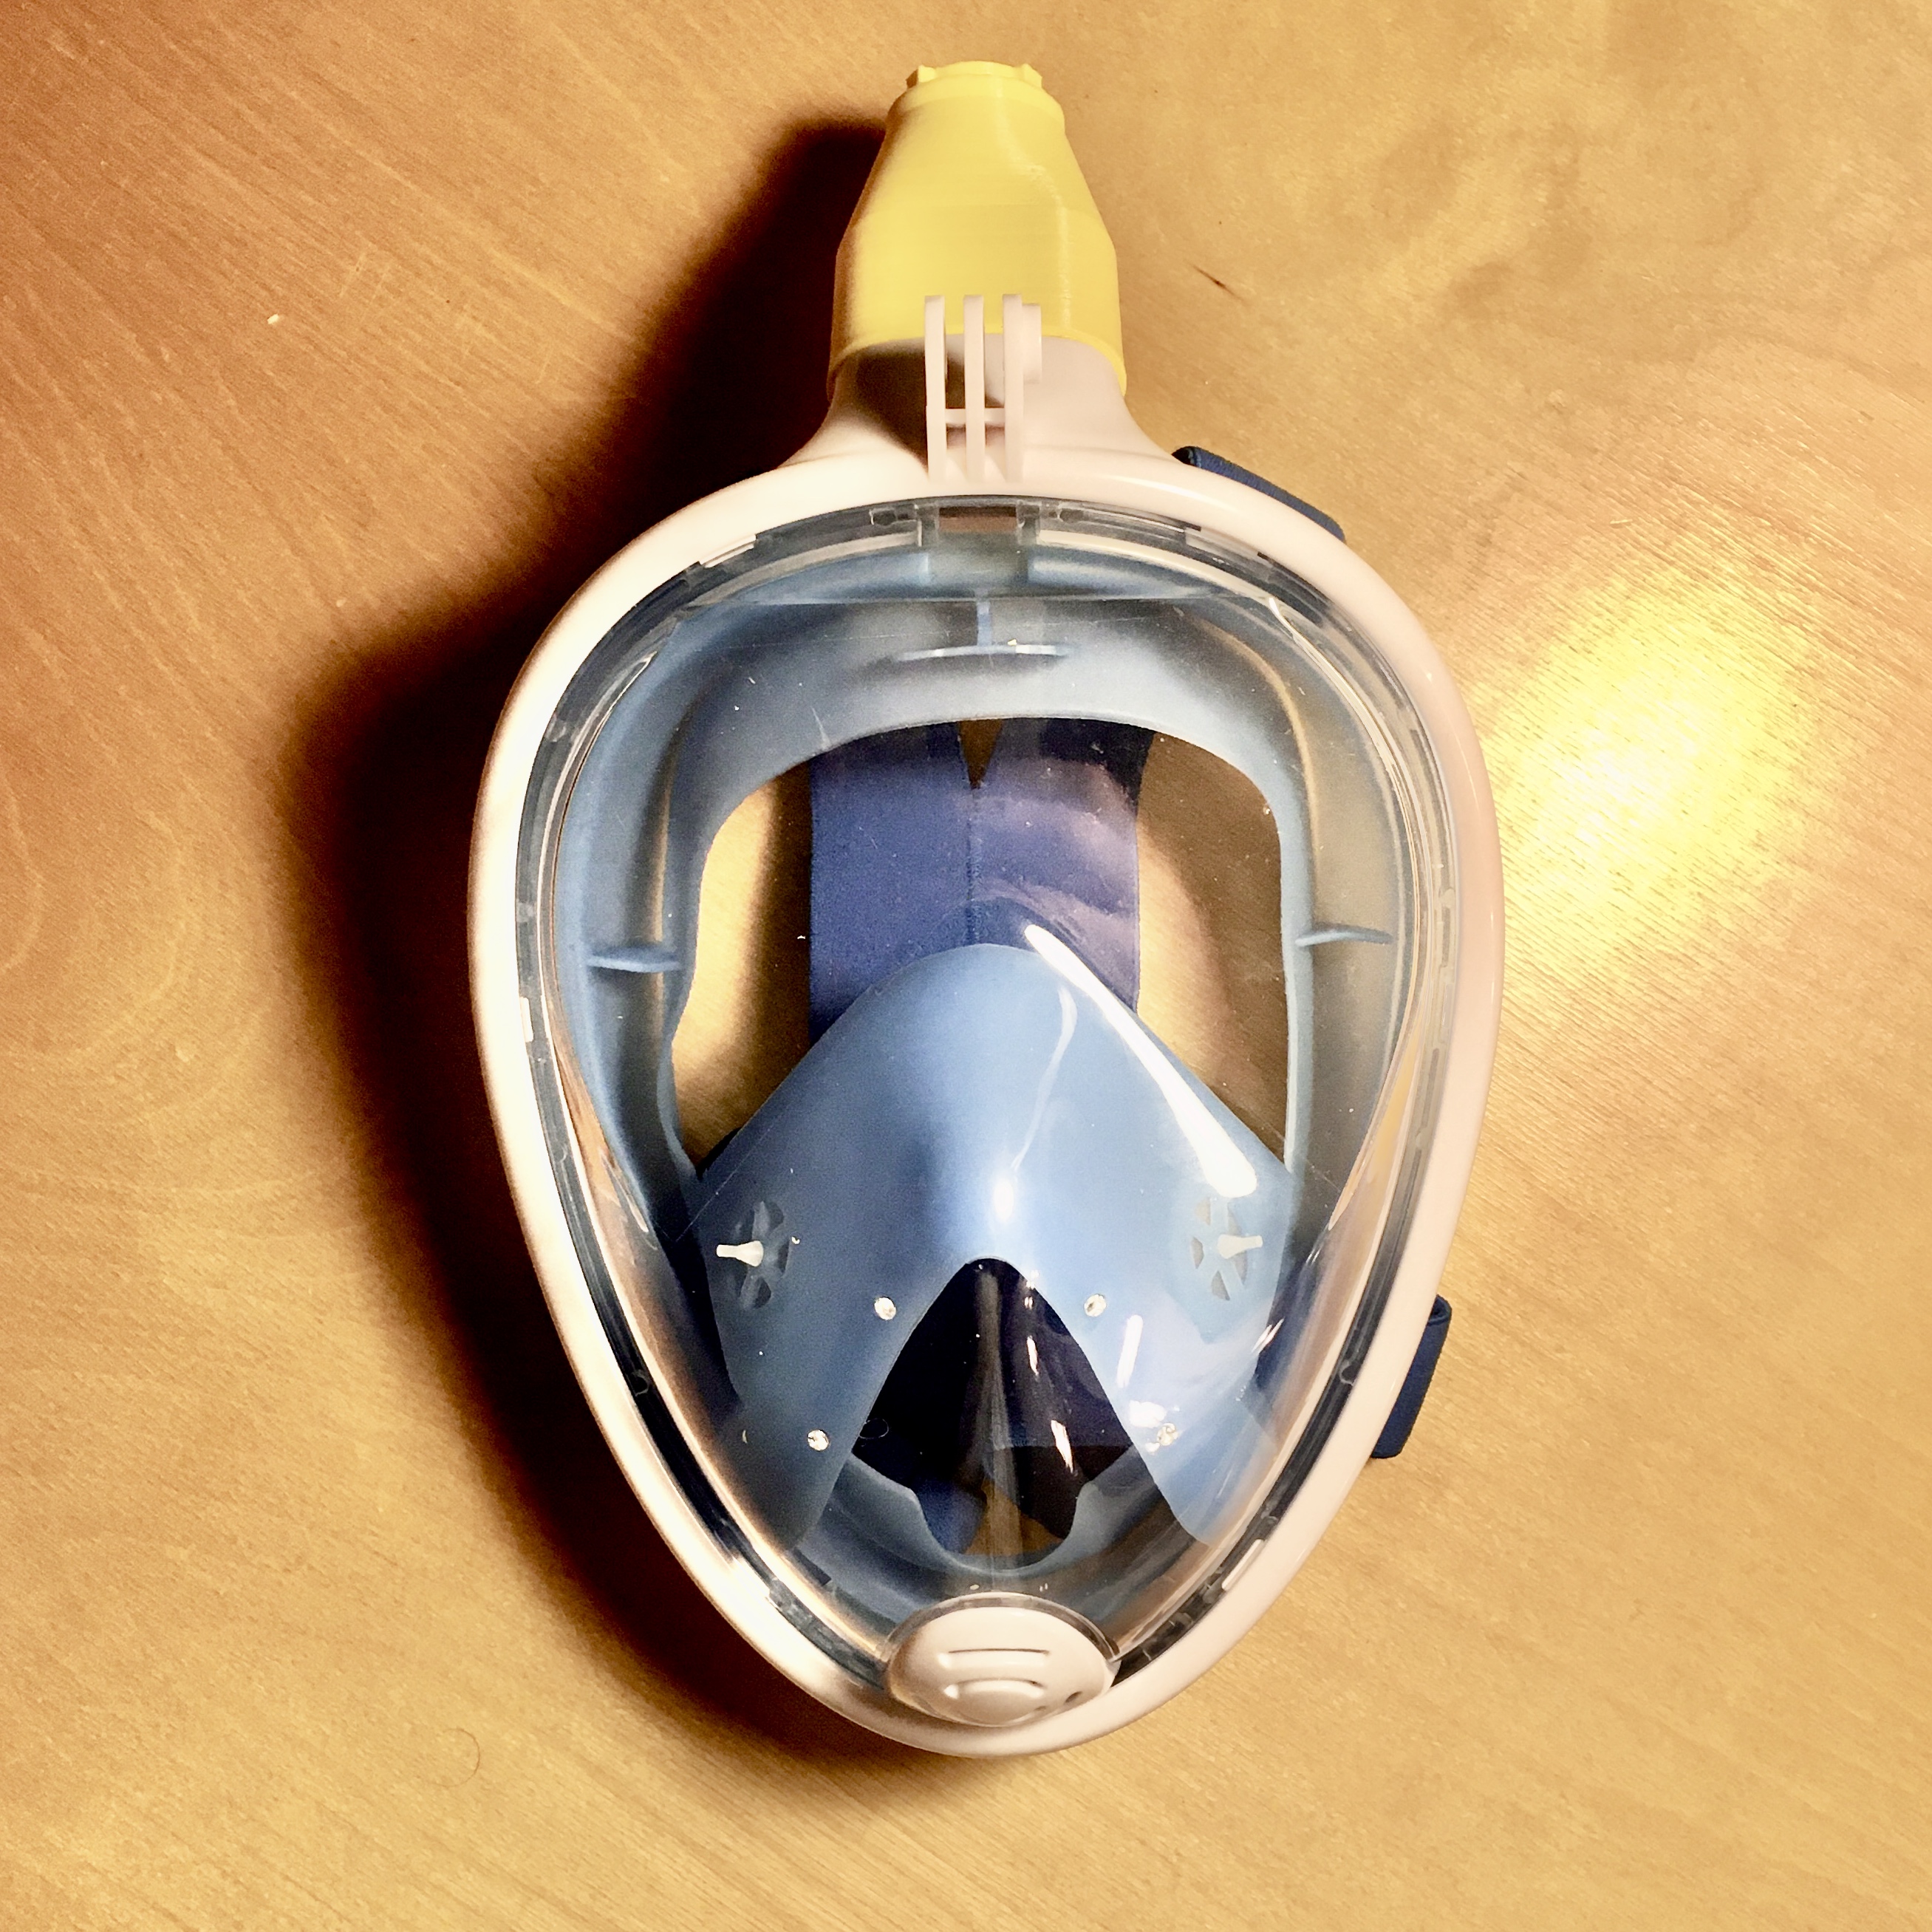 3M Adapter for Cheap Snorkel Mask Full Face by makerchad | Download ...